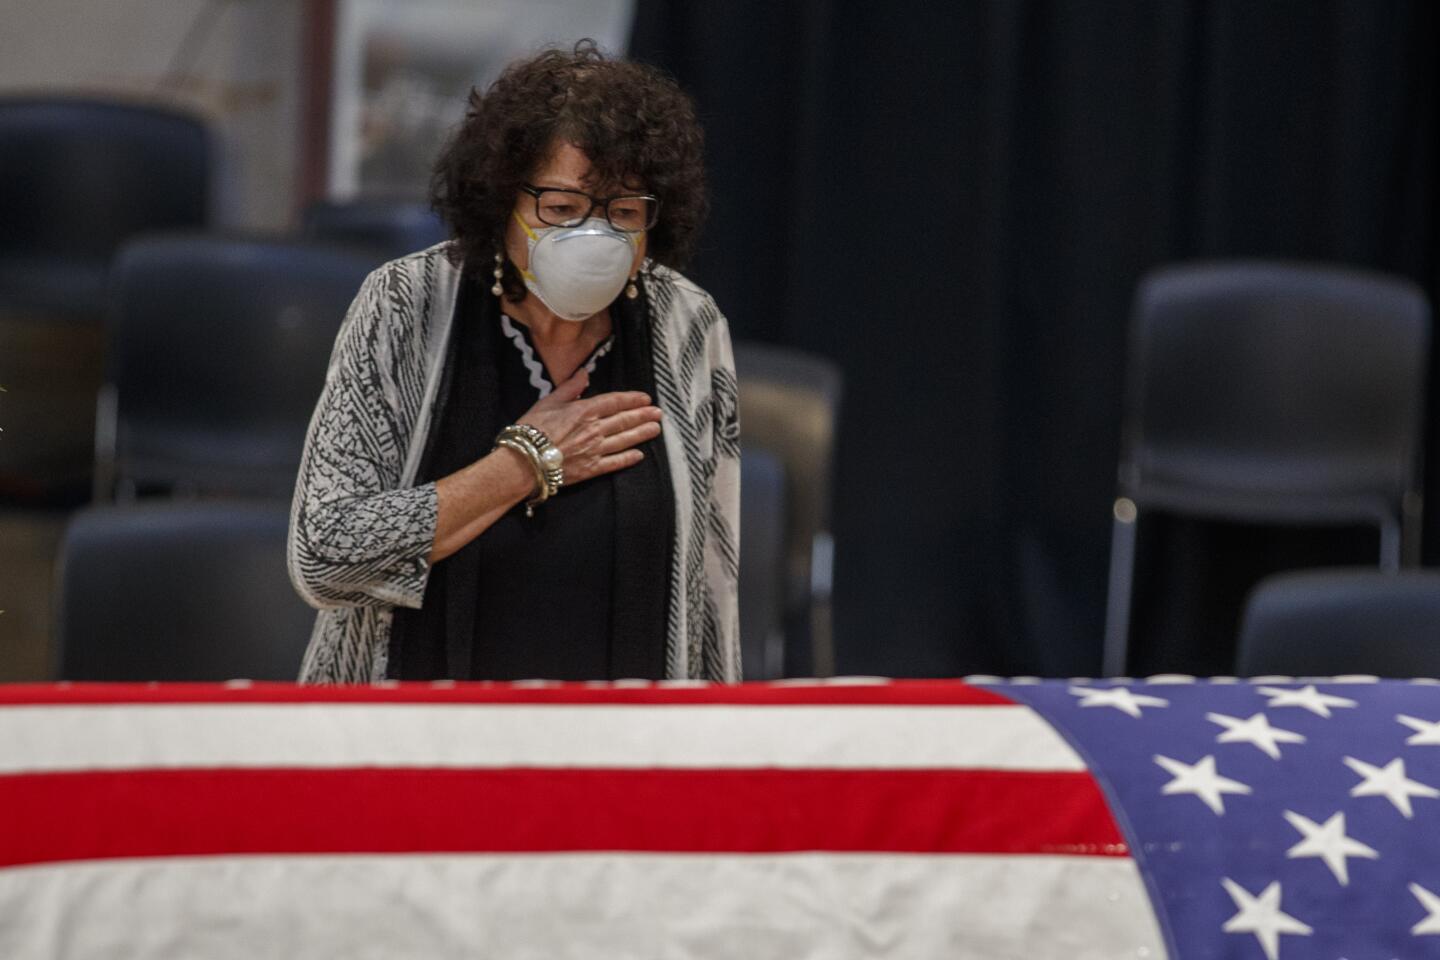 Supreme Court associate justice Sonia Sotomayor pauses at the flag-draped casket of Rep. John Lewis, D-Ga., as he lies in state in the Rotunda of the U.S. Capitol in Washington Monday.